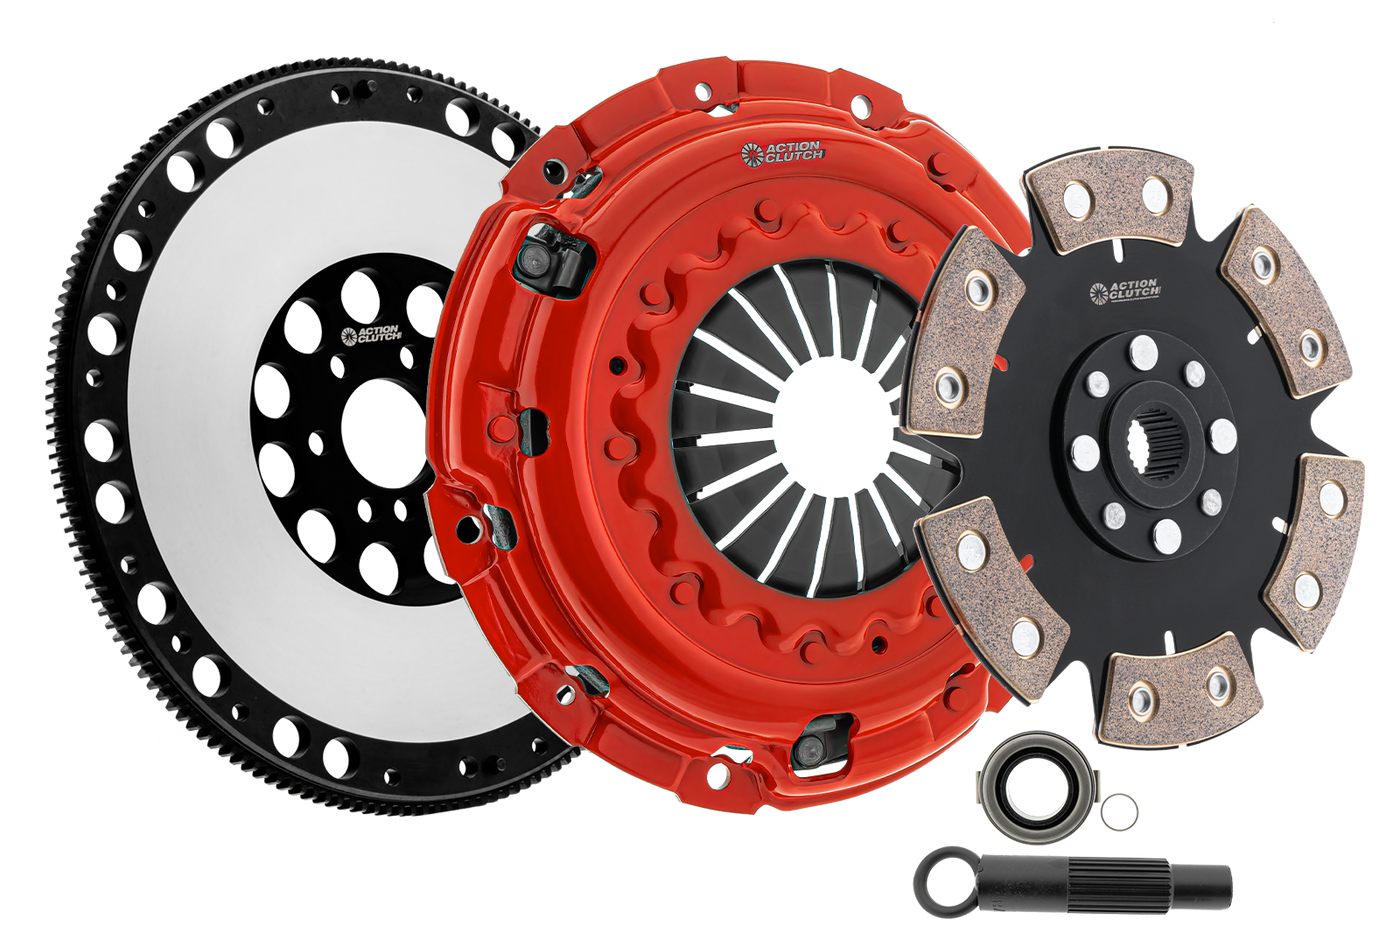 Stage 4 Clutch Kit (1MD) for Audi TT 2000-2006 1.8L Turbo FWD Includes Lightened Flywheel